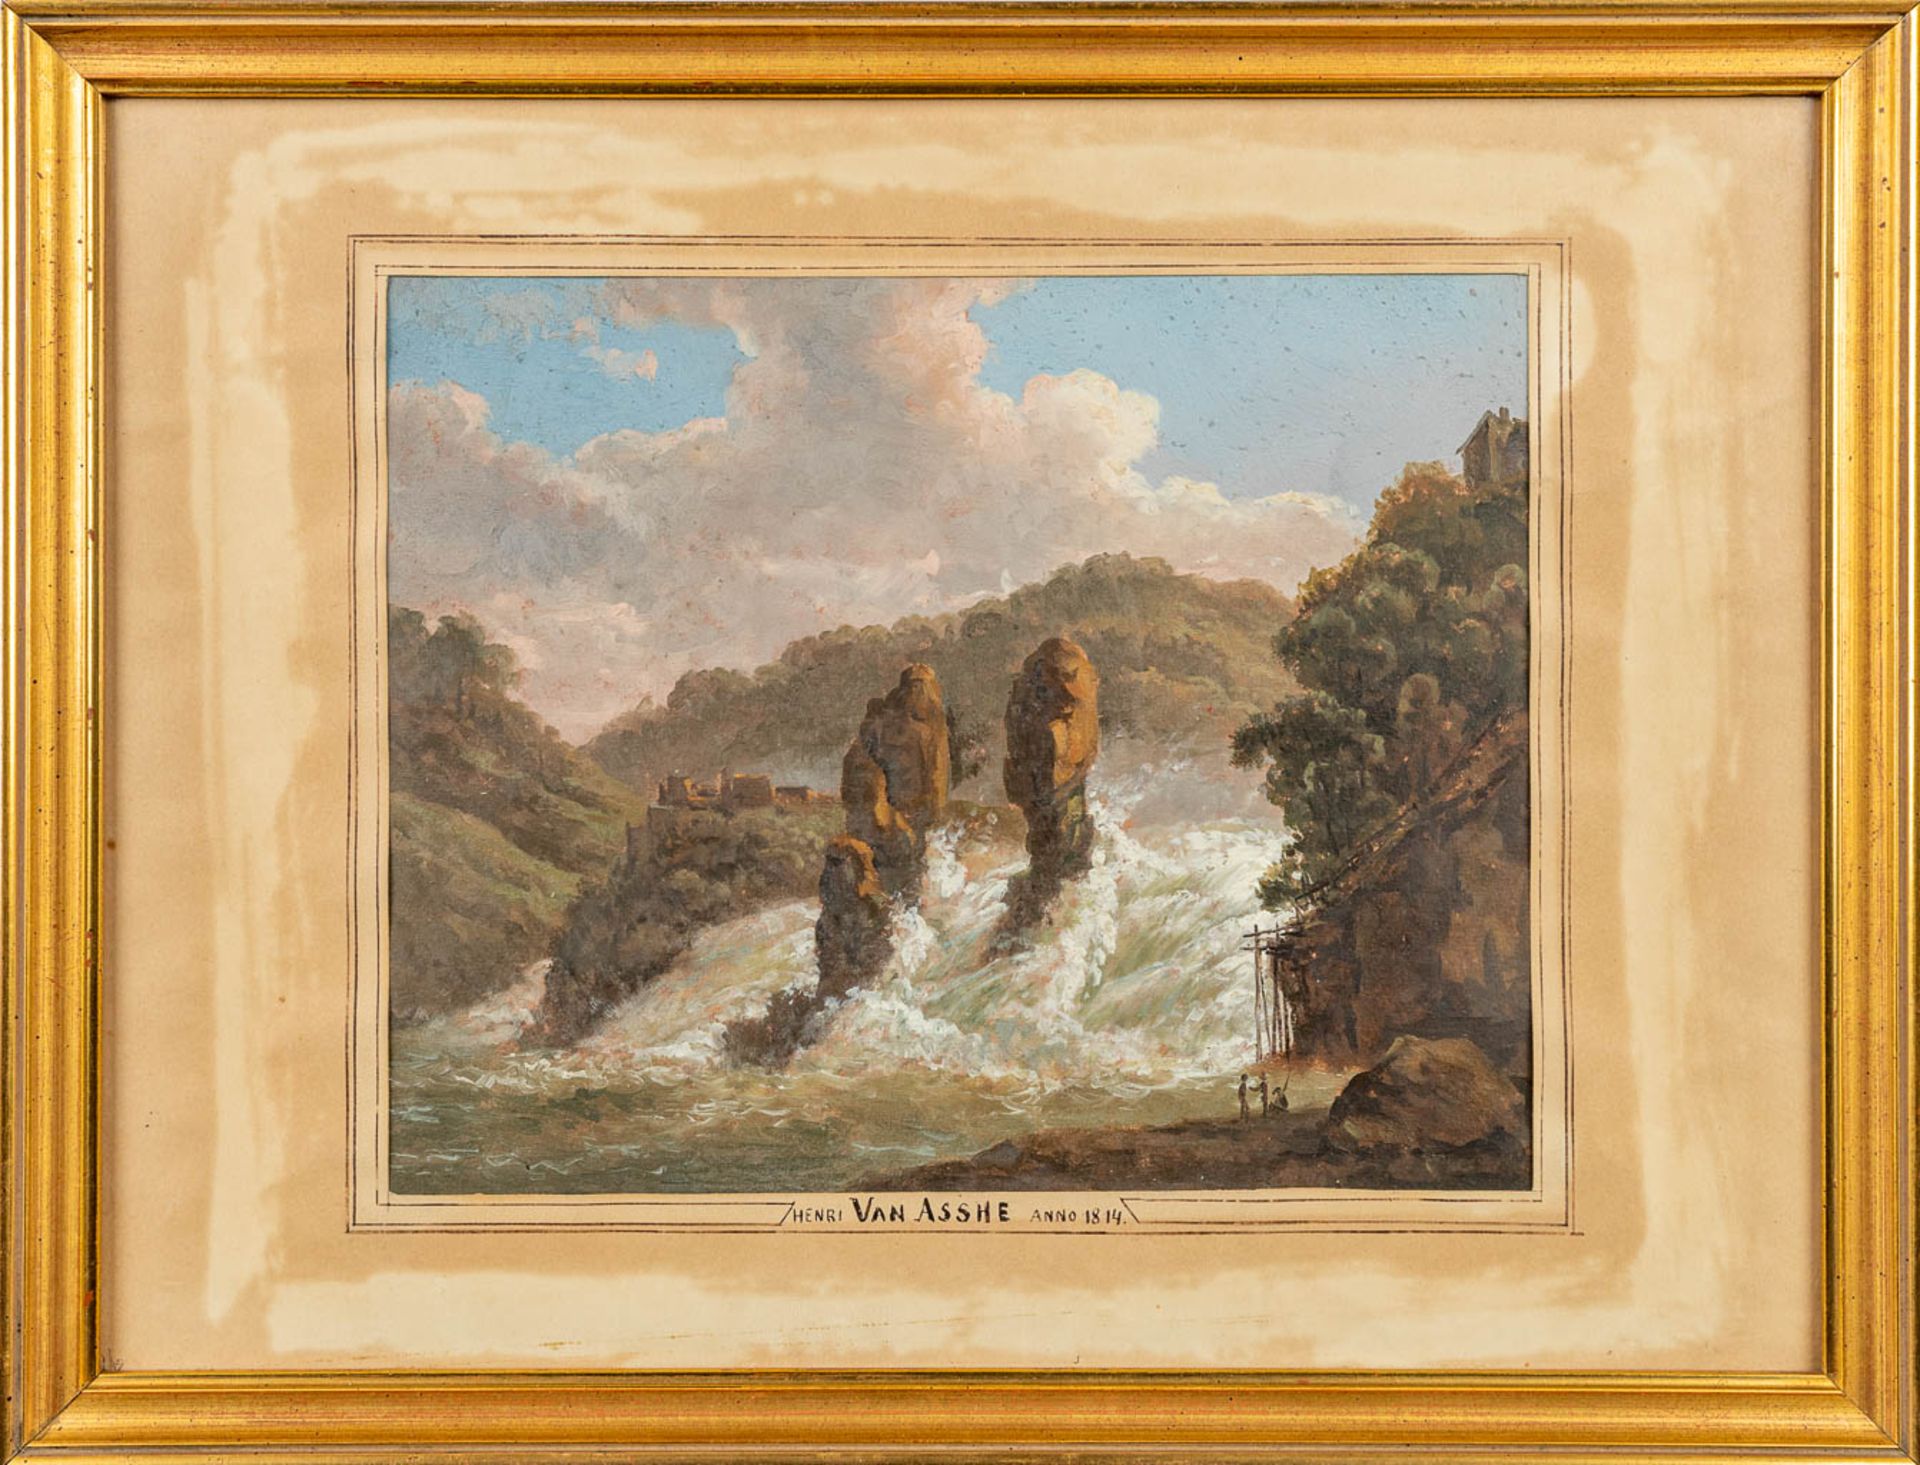 Henri VAN ASSCHE (1774-1841) 'The Waterfall' a painting, oil on paper. (26 x 20 cm) - Image 7 of 7